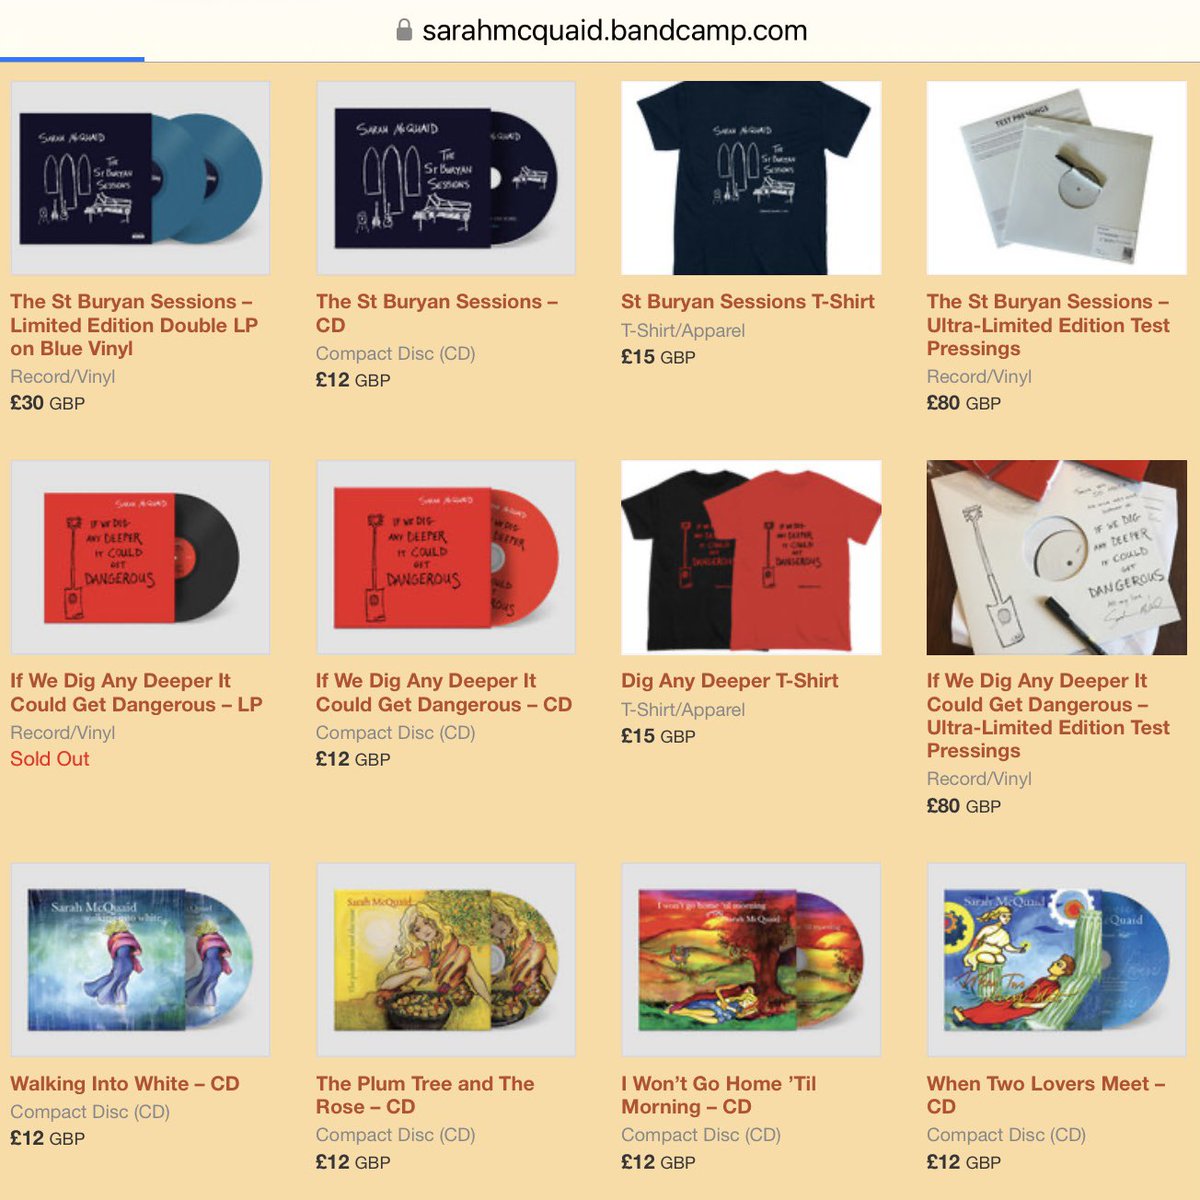 Today is #BandcampFriday, when @Bandcamp waives its revenue share. That means that today is a good day to buy CDs, LPs, downloads & other merch from me & other artists like myself who sell their merch through this superb platform! See sarahmcquaid.bandcamp.com & also see ->